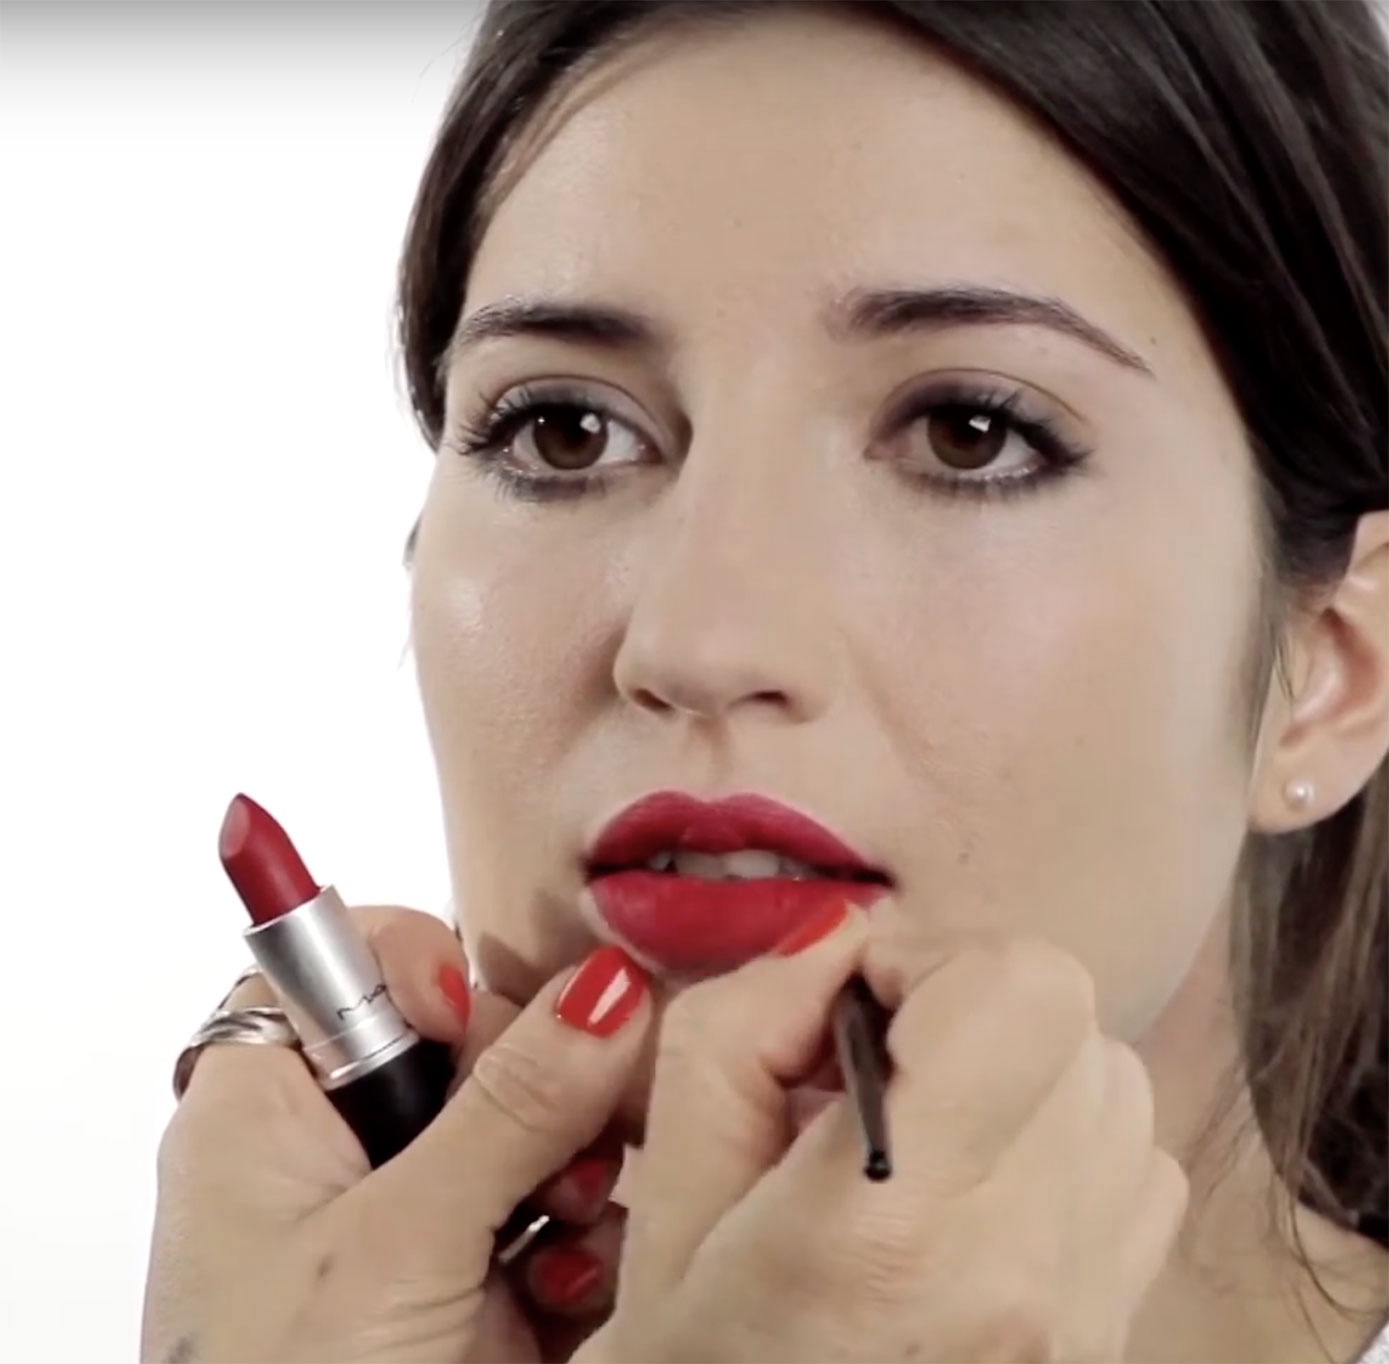 The face of a girl, being made up with deep red lipstick, by makeup artist Louise Wittlich